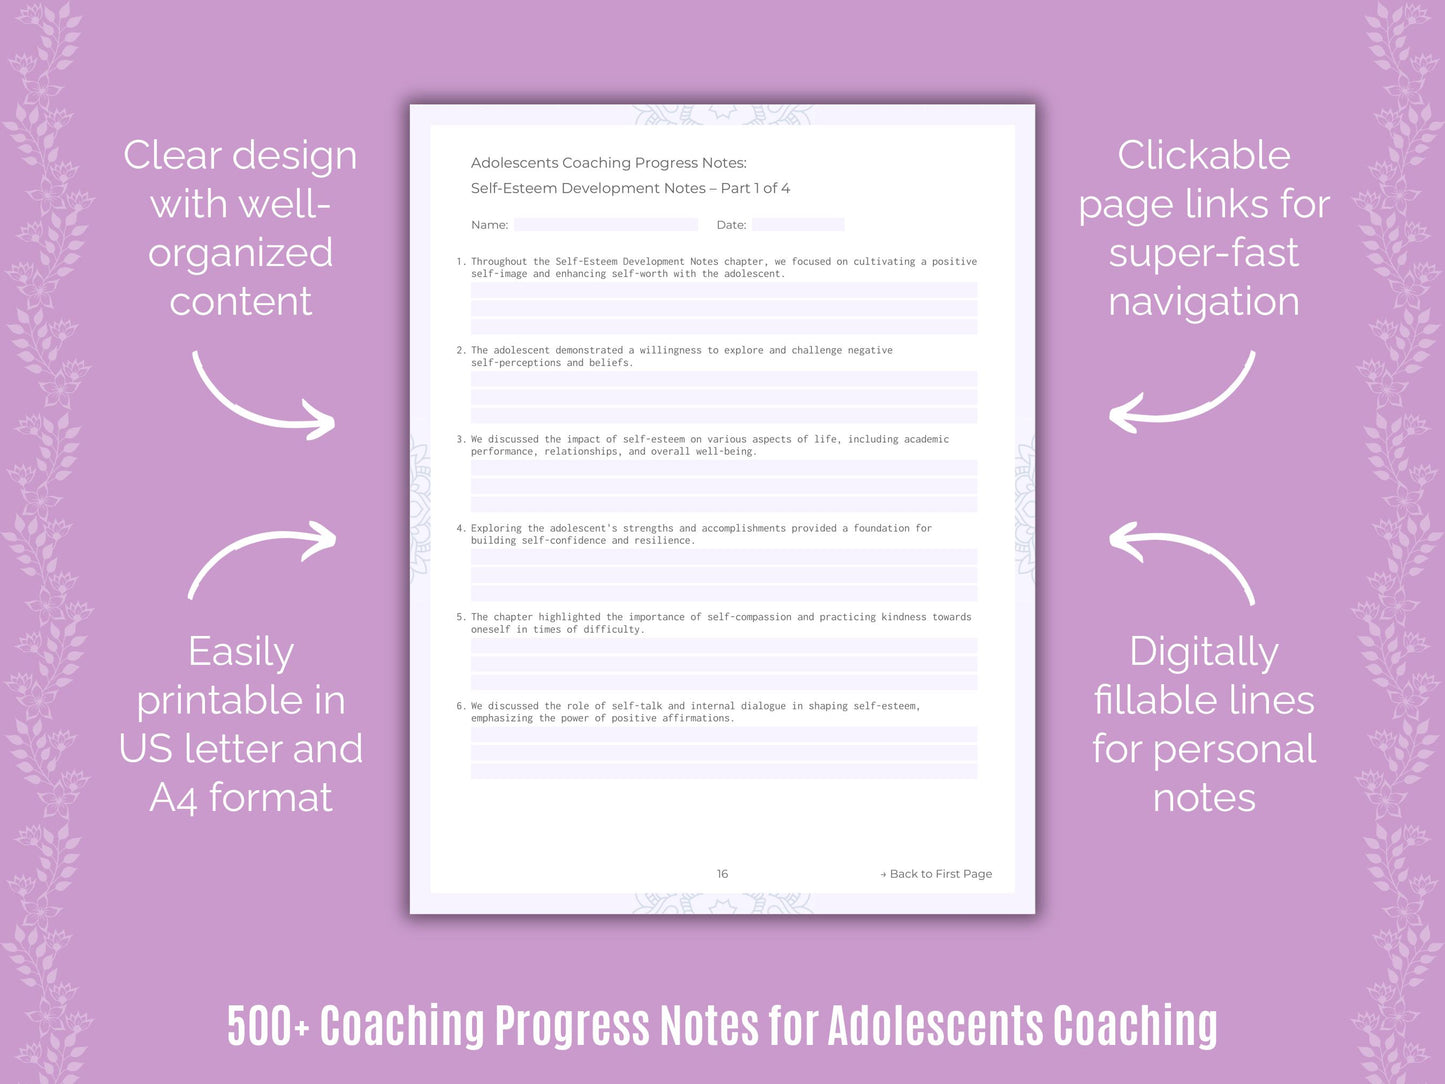 Adolescents Coaching Resource